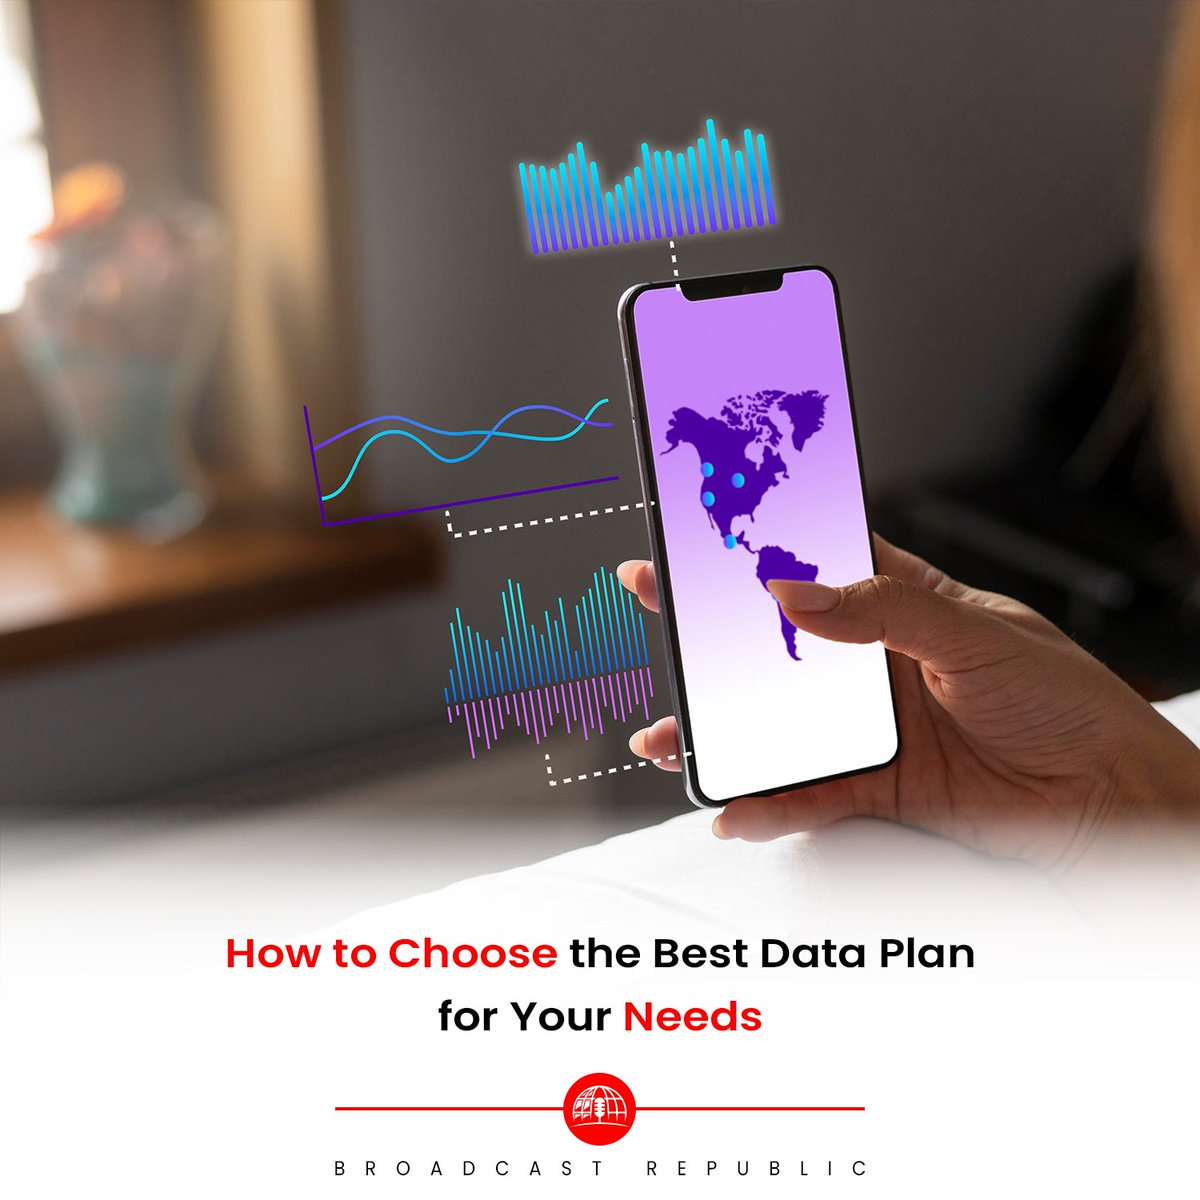 In today's interconnected world, selecting the right data plan is essential for a seamless online experience. 

#BroadcastRepublic #DataPlanGuide #DigitalLifestyle #InternetUsage #SpeedMatters #BudgetFriendlyTech #FlexibilityInTech #onicDataPlans #DigitalLife #TechTips